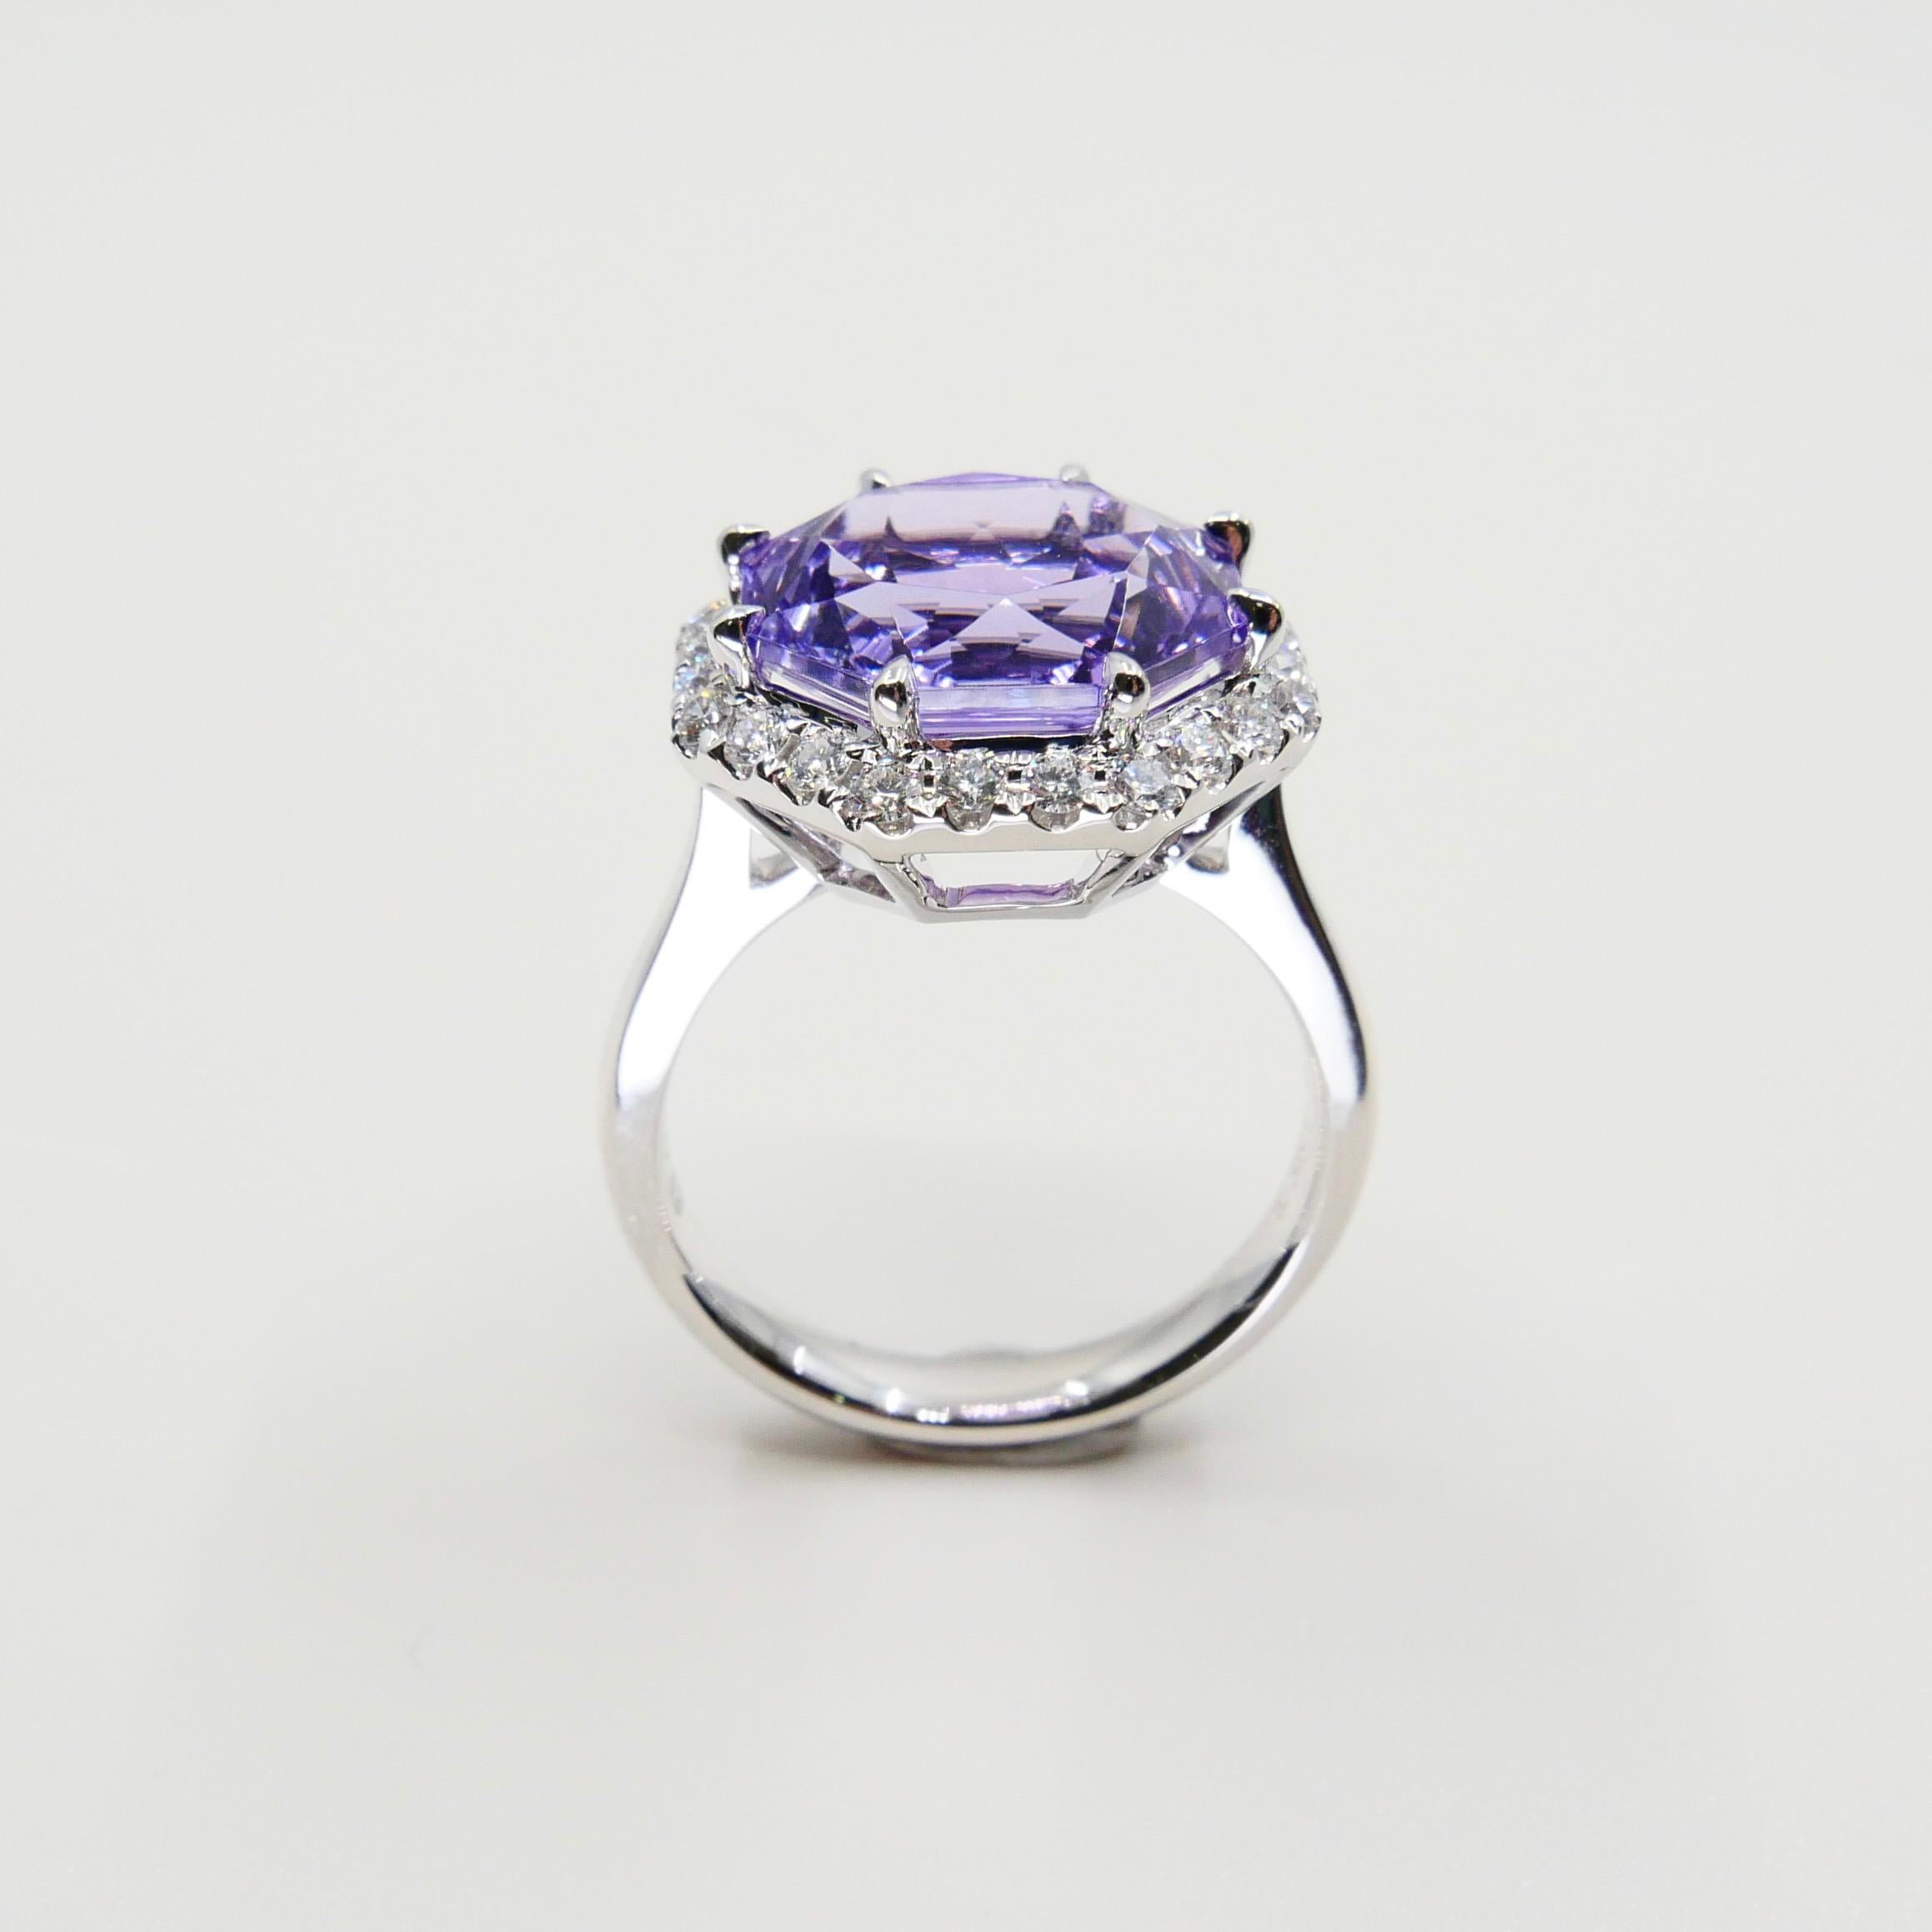 Women's 5.32 Carat Flower Cut Amethyst and Diamond Cocktail Ring, Statement Ring